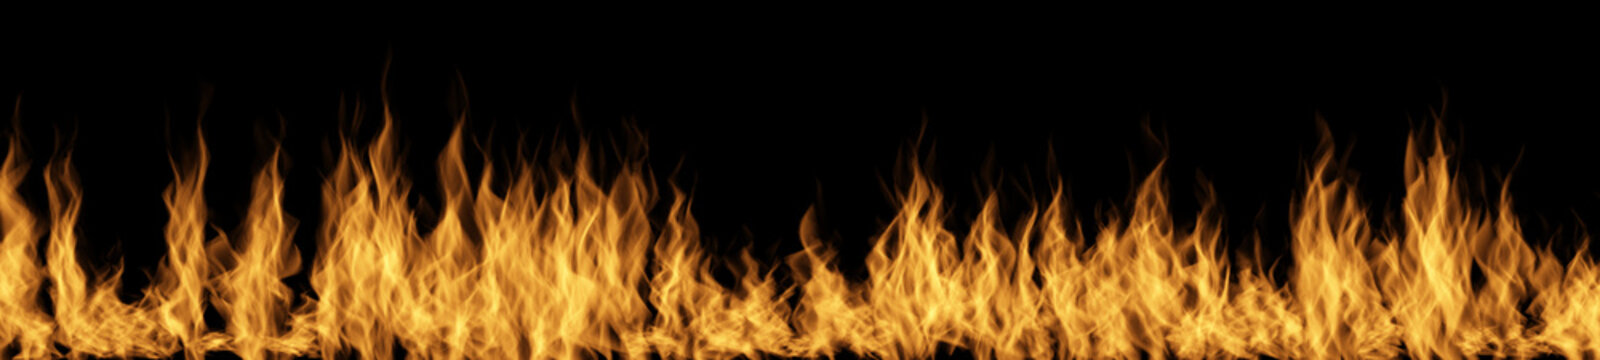 Fire Flames on Black Background. Includes Copy Space